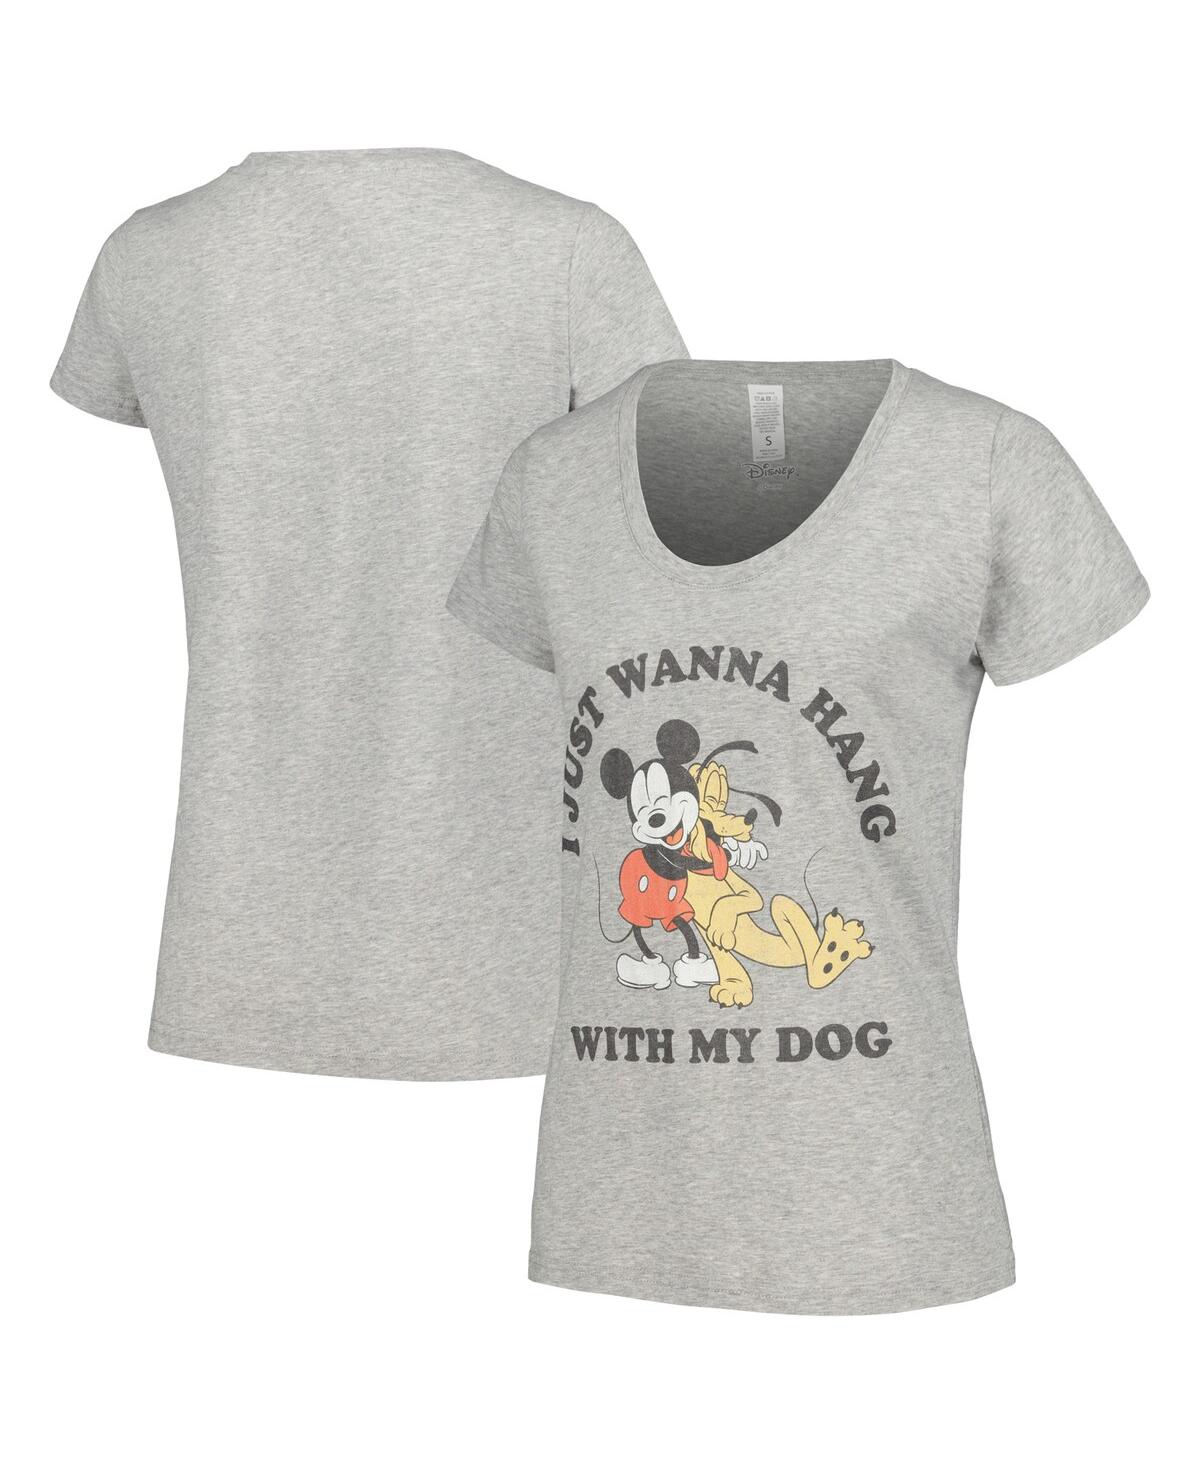 Women's Heather Gray Mickey and Friends Dog Lover Scoop Neck T-shirt - Heather Gray